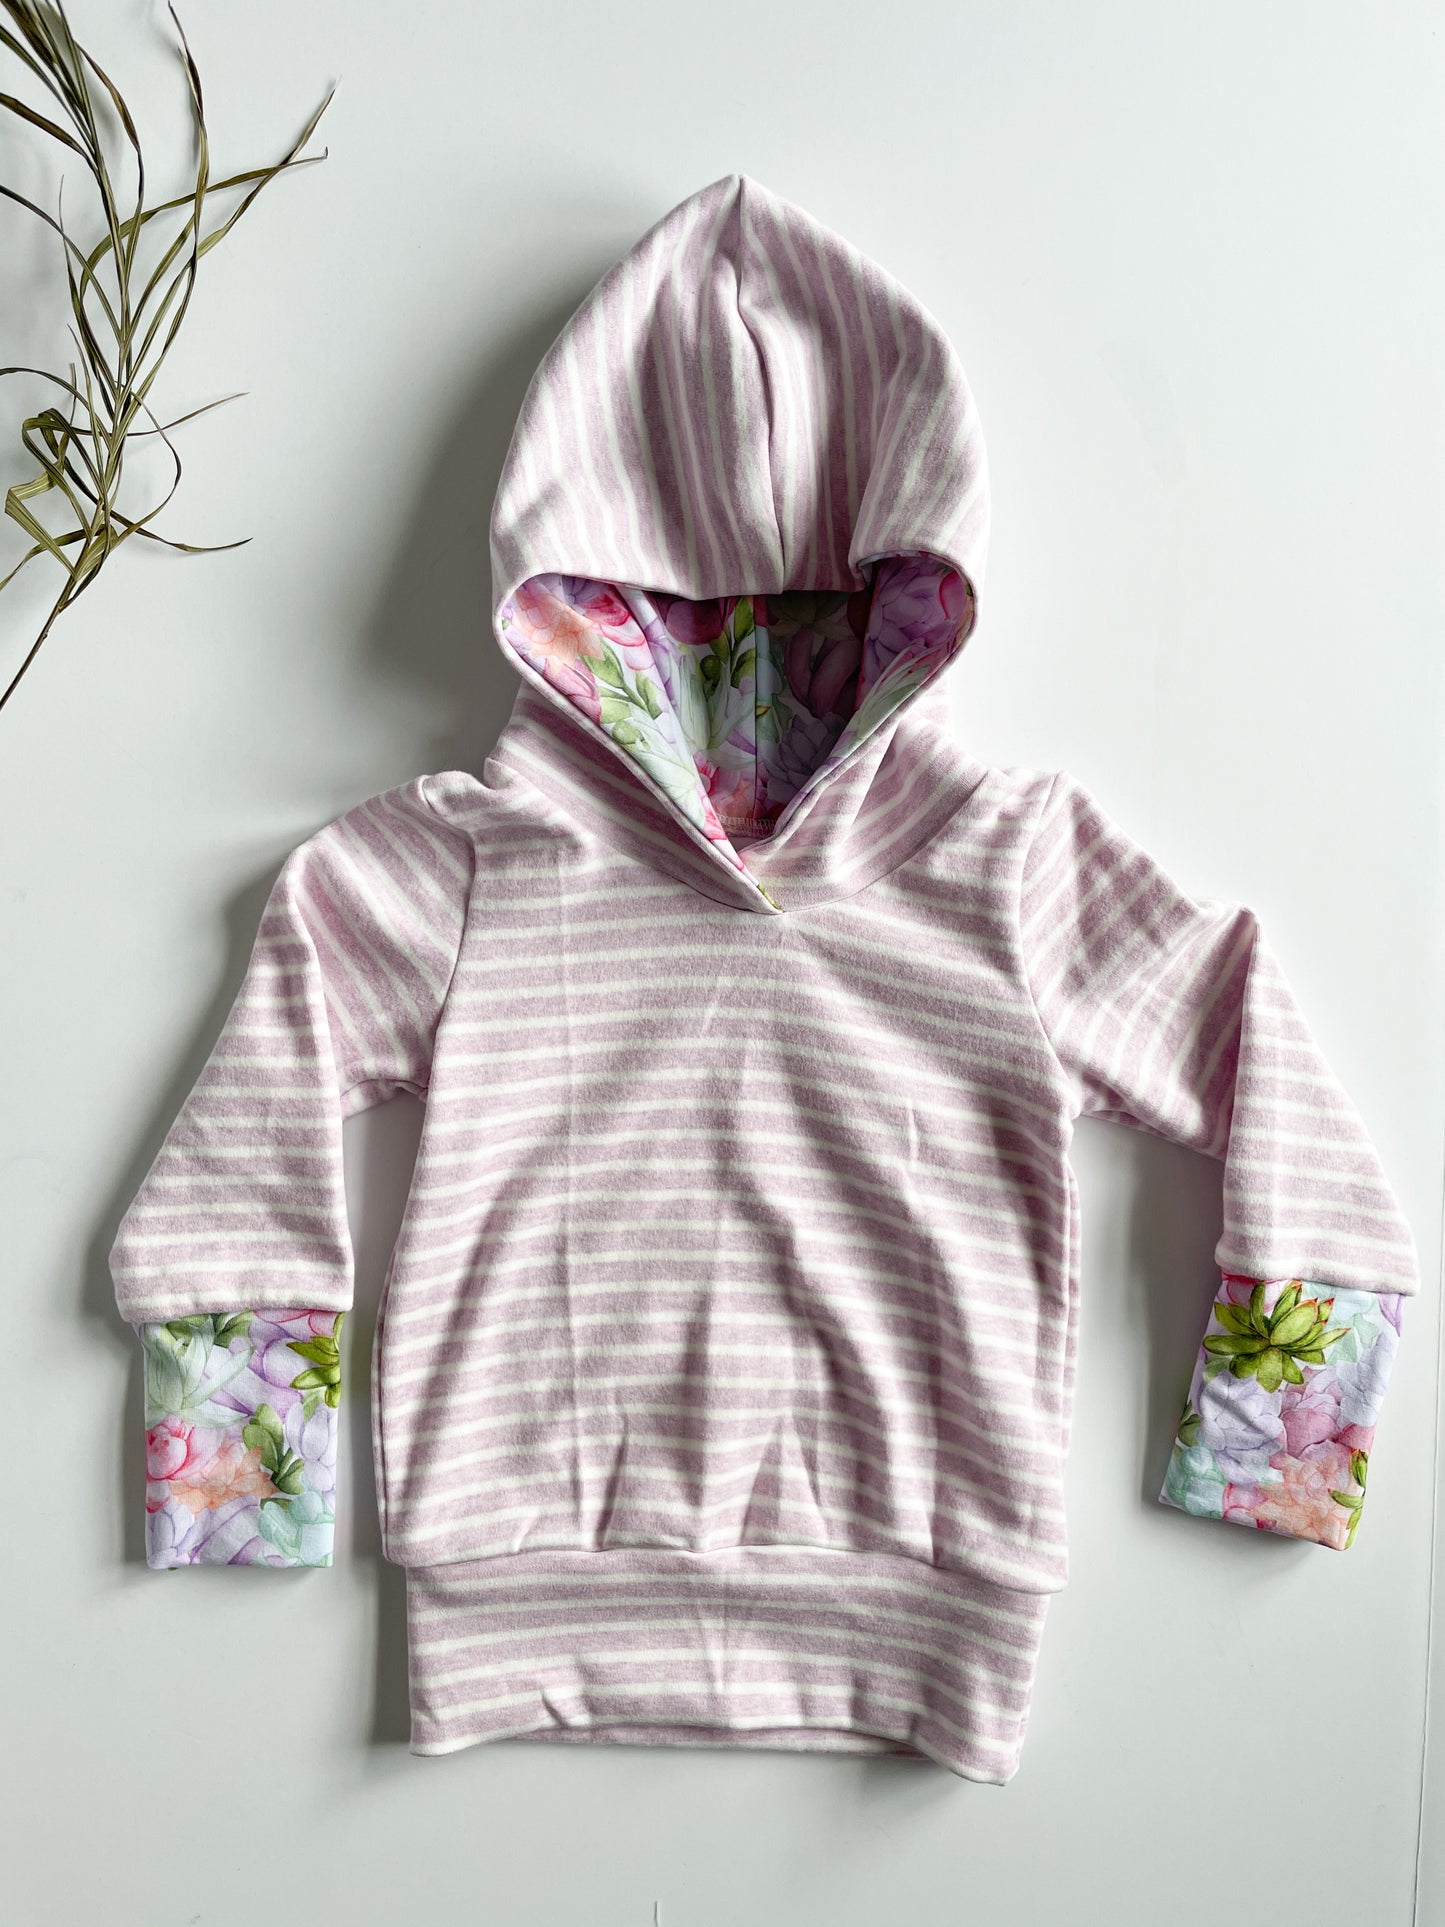 Pastel Lilac Succulent Striped Grow-With-Me Baby Hoodie - 6 Months - 3 Years